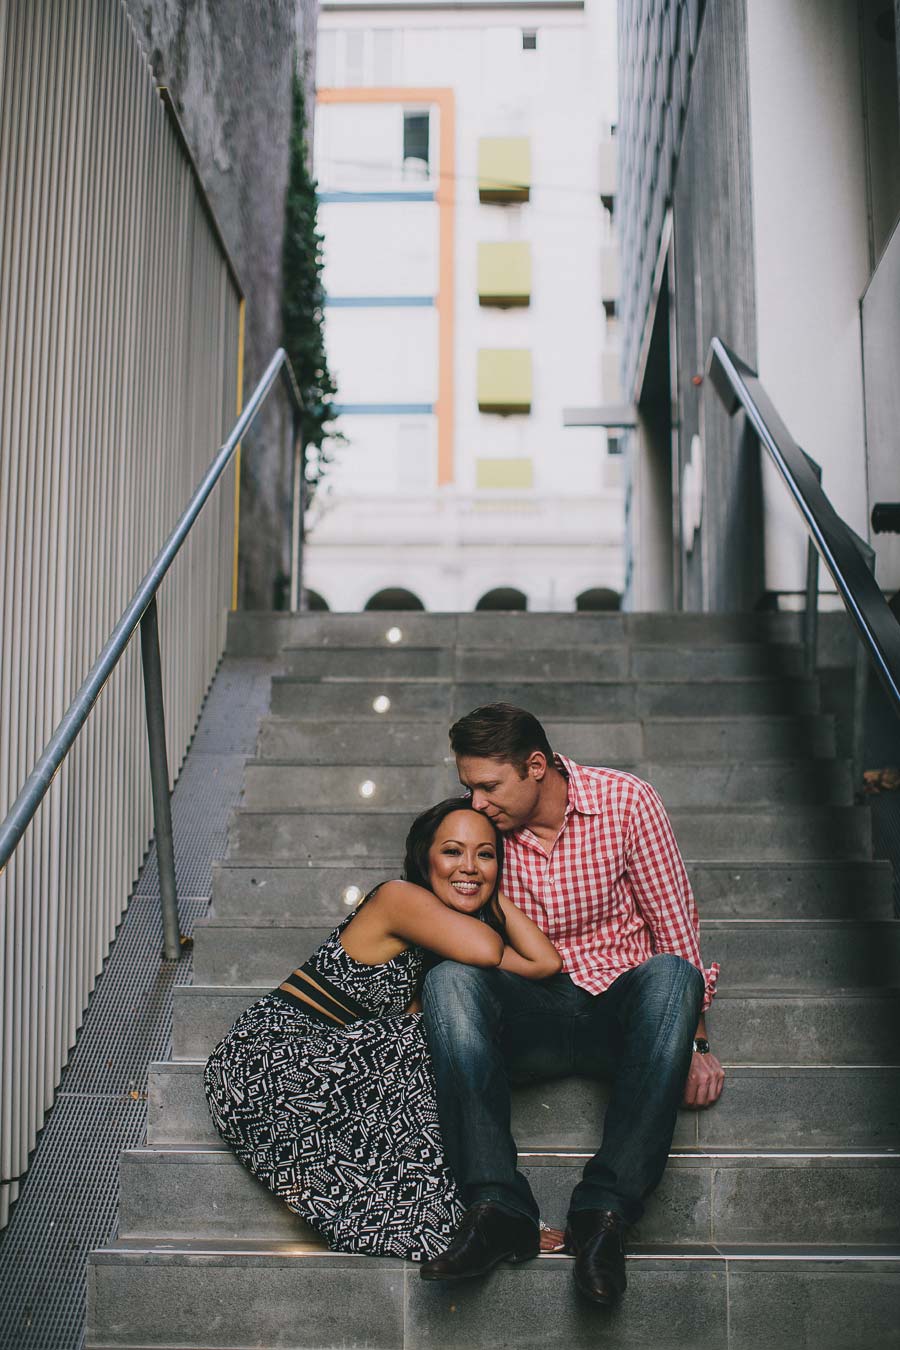 Melbourne engaged couple sitting on stairs